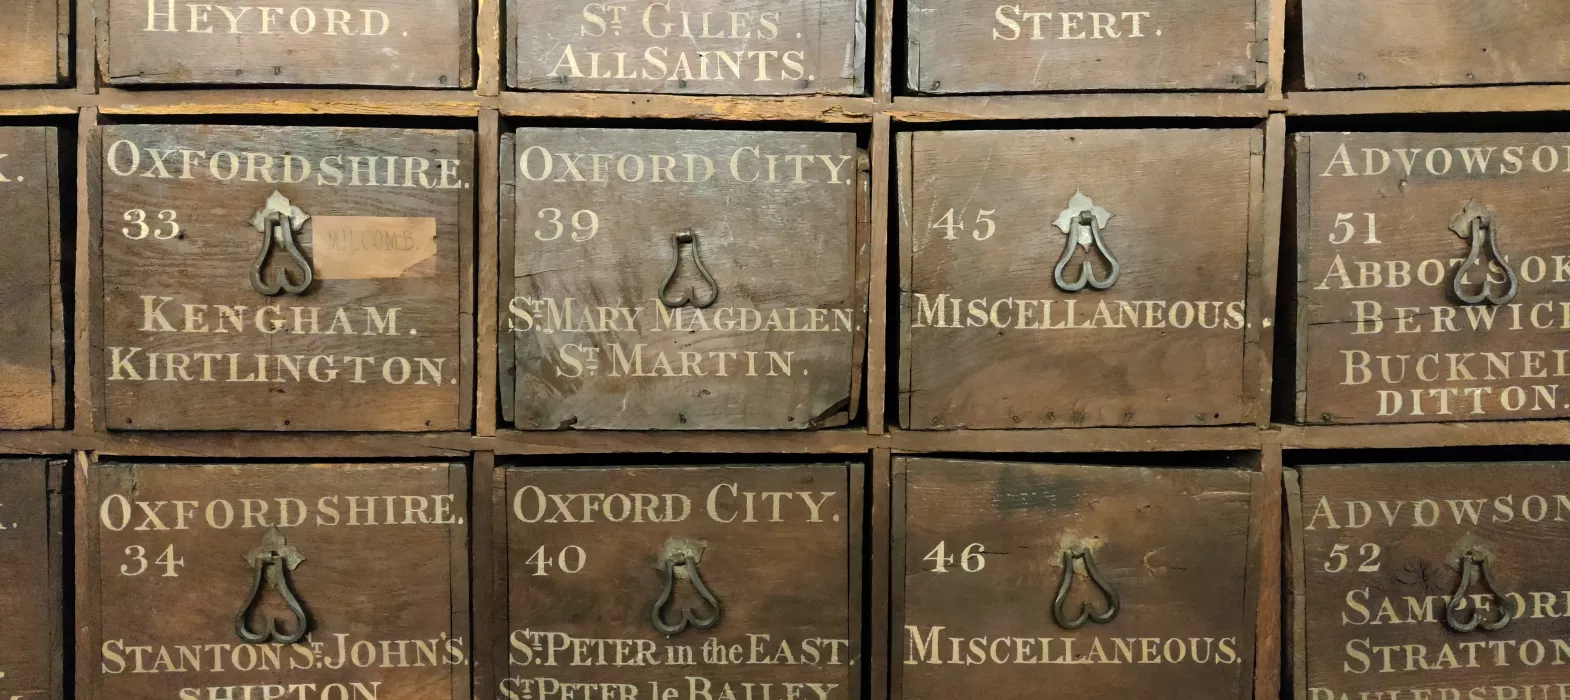 Storage boxes for archives, Muniment Tower, New College, Oxford